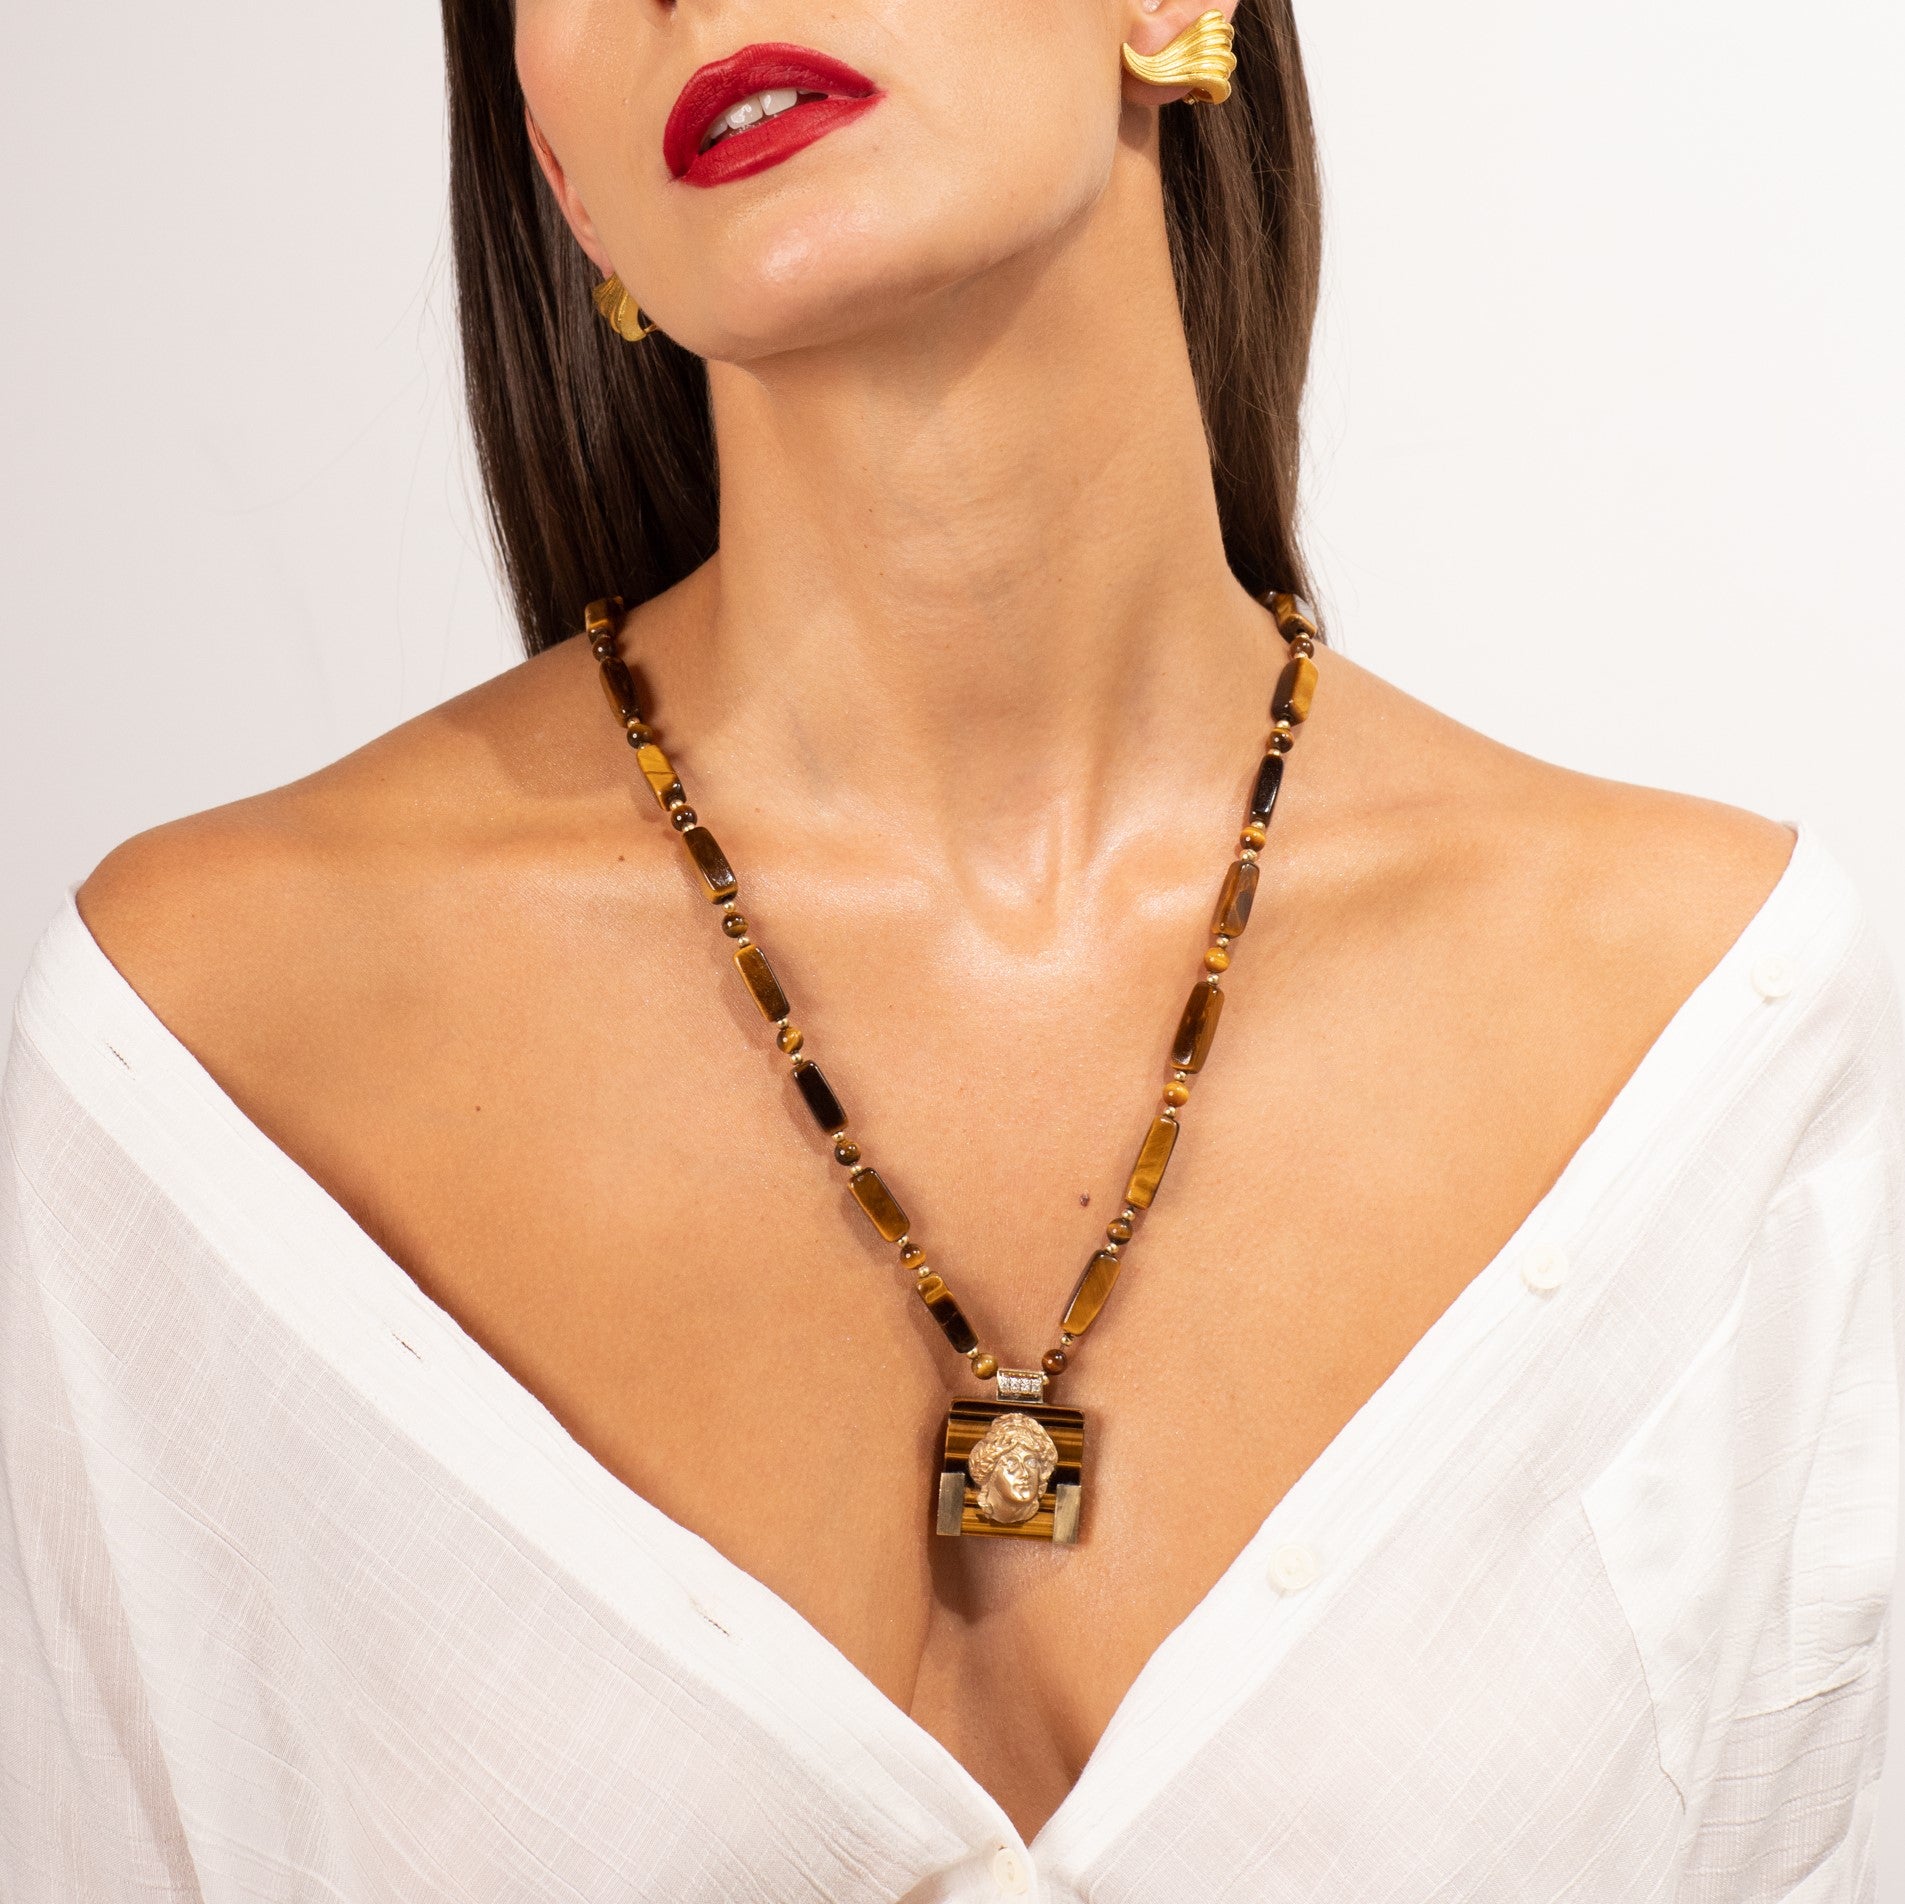 Tiger eye necklace with portrait pendant worn on a woman’s neck.